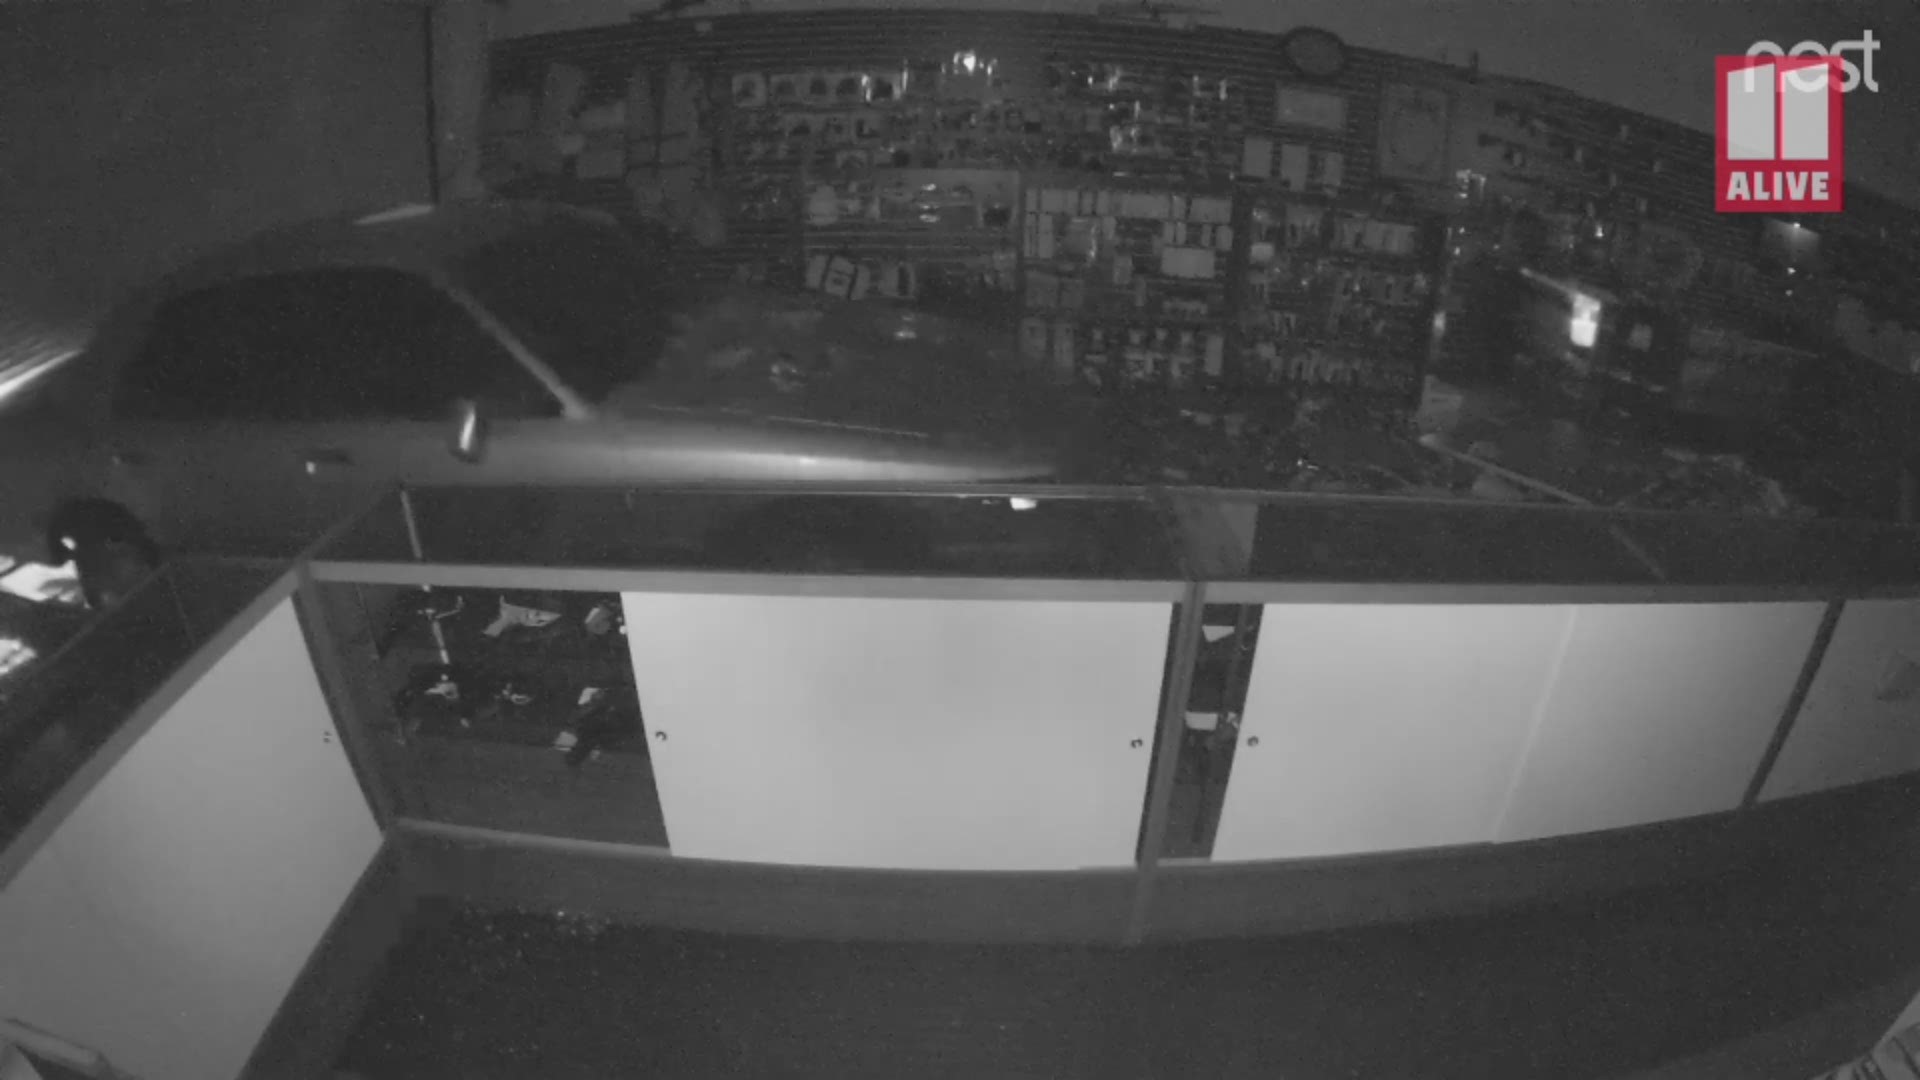 The driver slammed a stolen car into the store front and quickly made off with as many guns as he could carry. Now police need help identifying him.